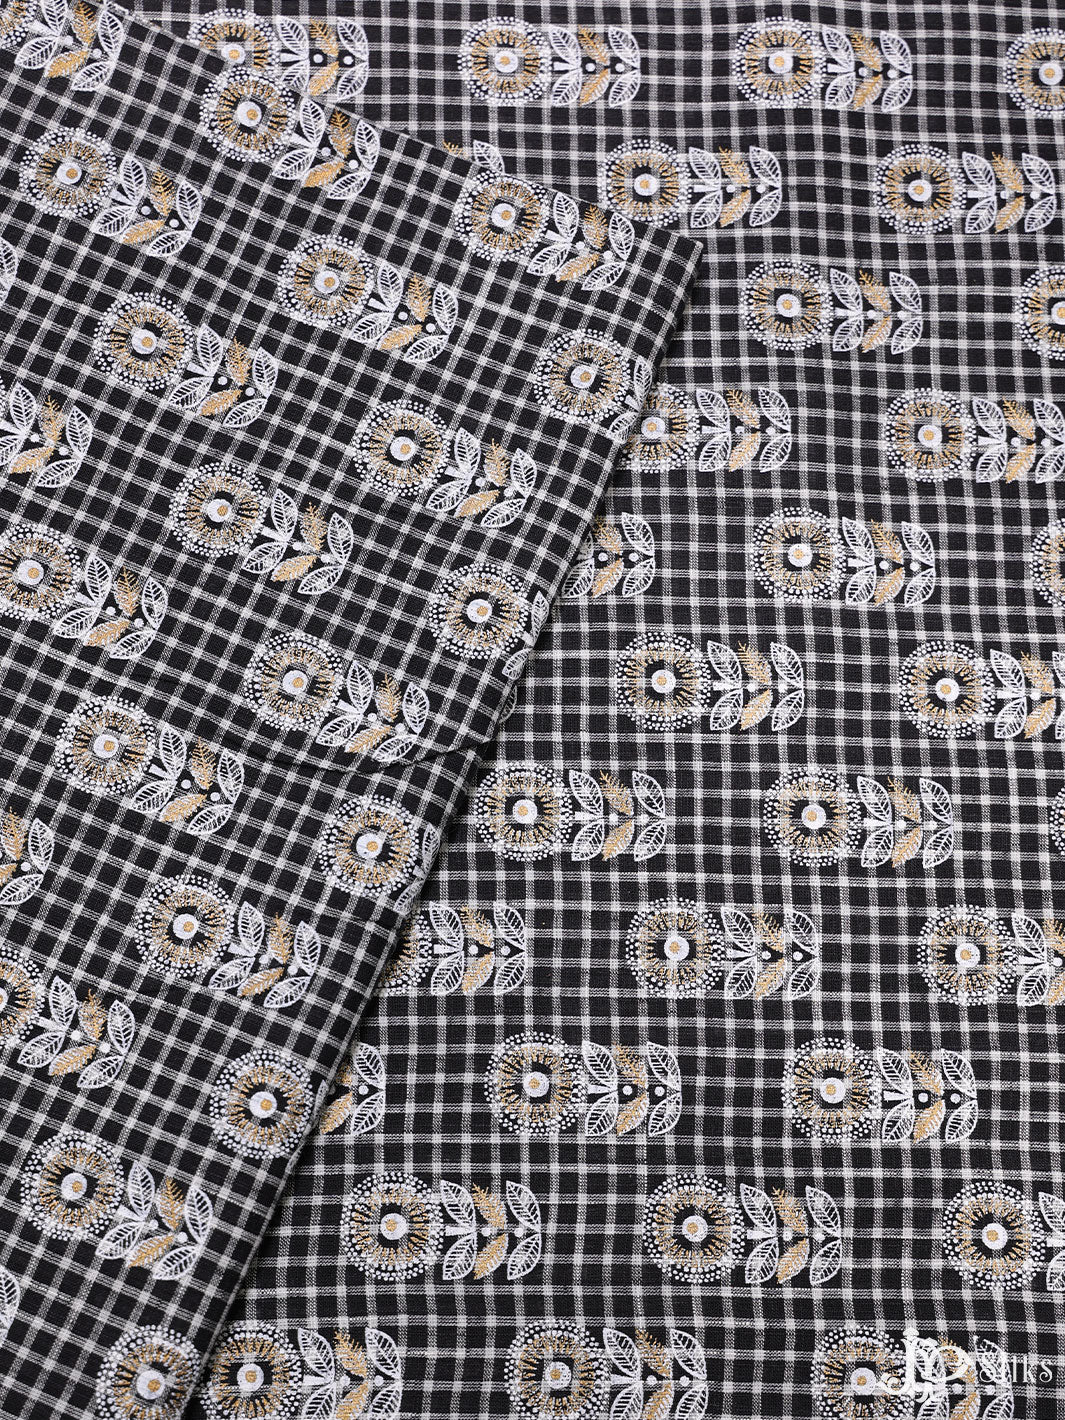 Black and White Cotton Fabric - A6526 - View 2